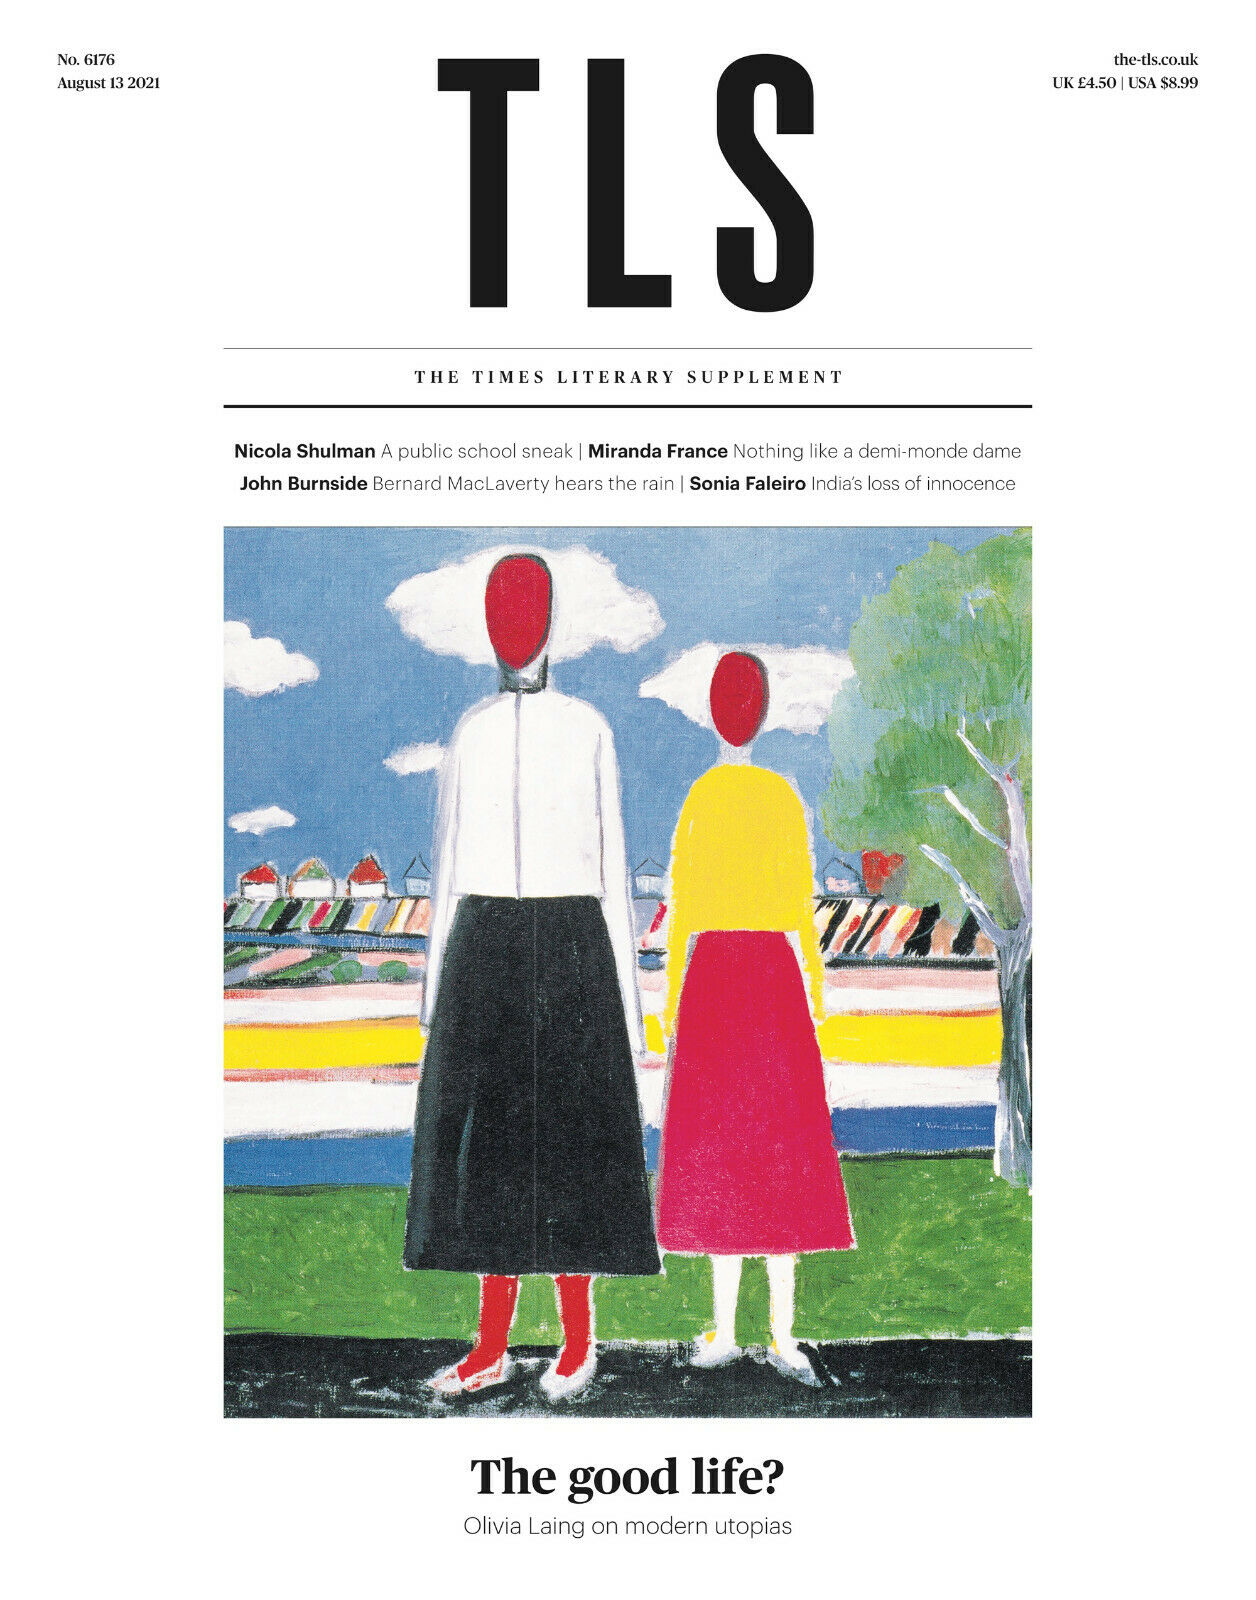 Times Literary Supplement No. 6176 13 August 2021 |